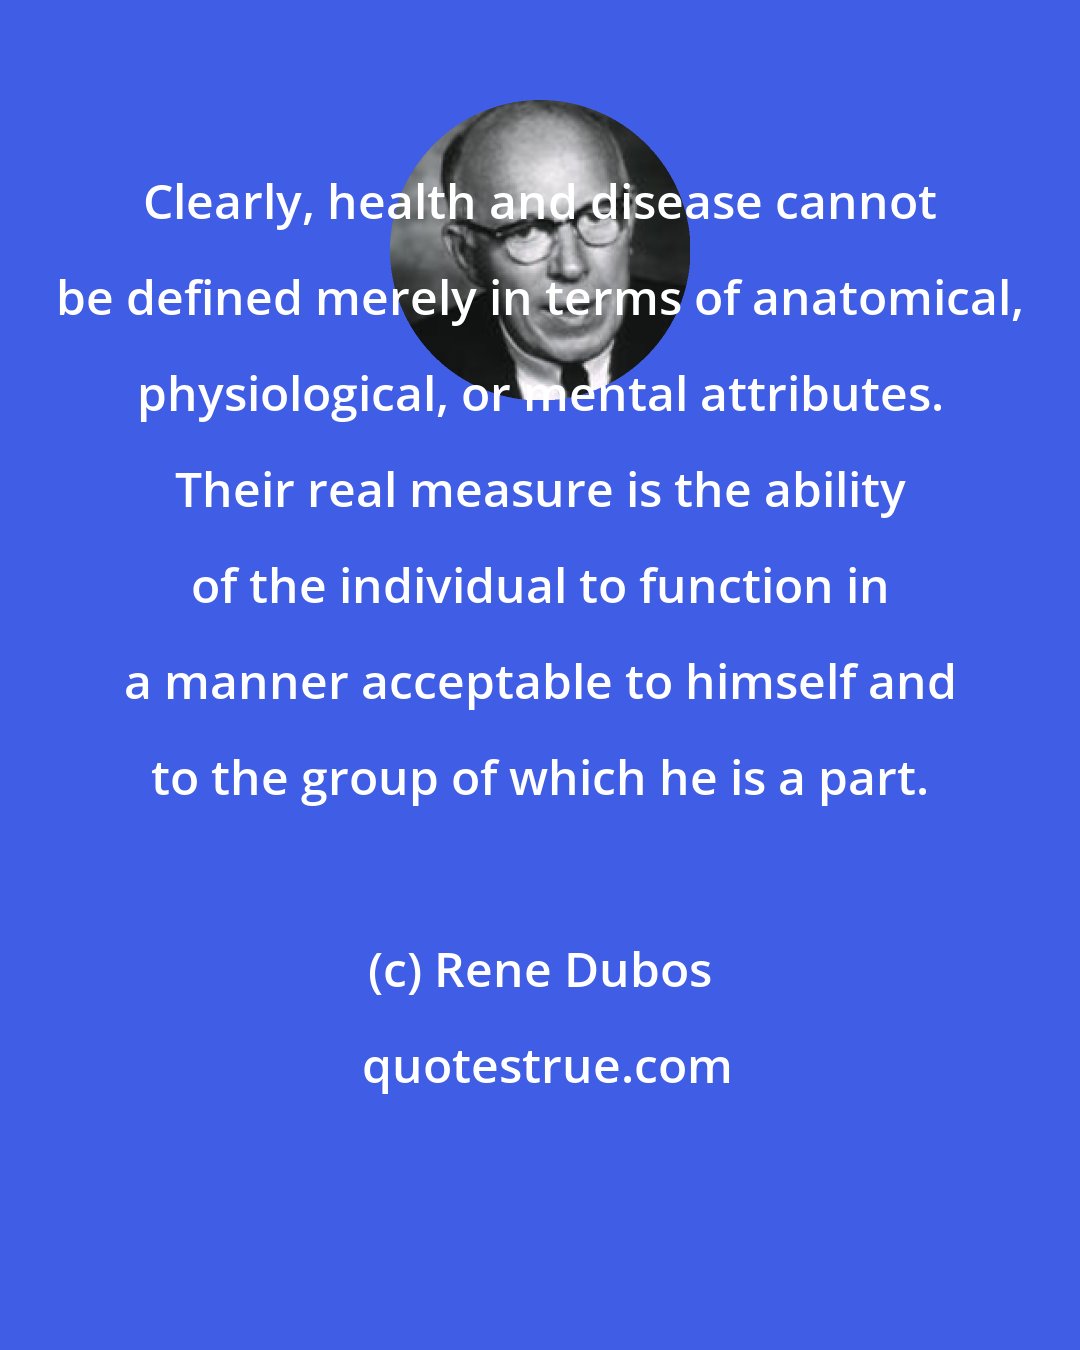 Rene Dubos: Clearly, health and disease cannot be defined merely in terms of anatomical, physiological, or mental attributes. Their real measure is the ability of the individual to function in a manner acceptable to himself and to the group of which he is a part.